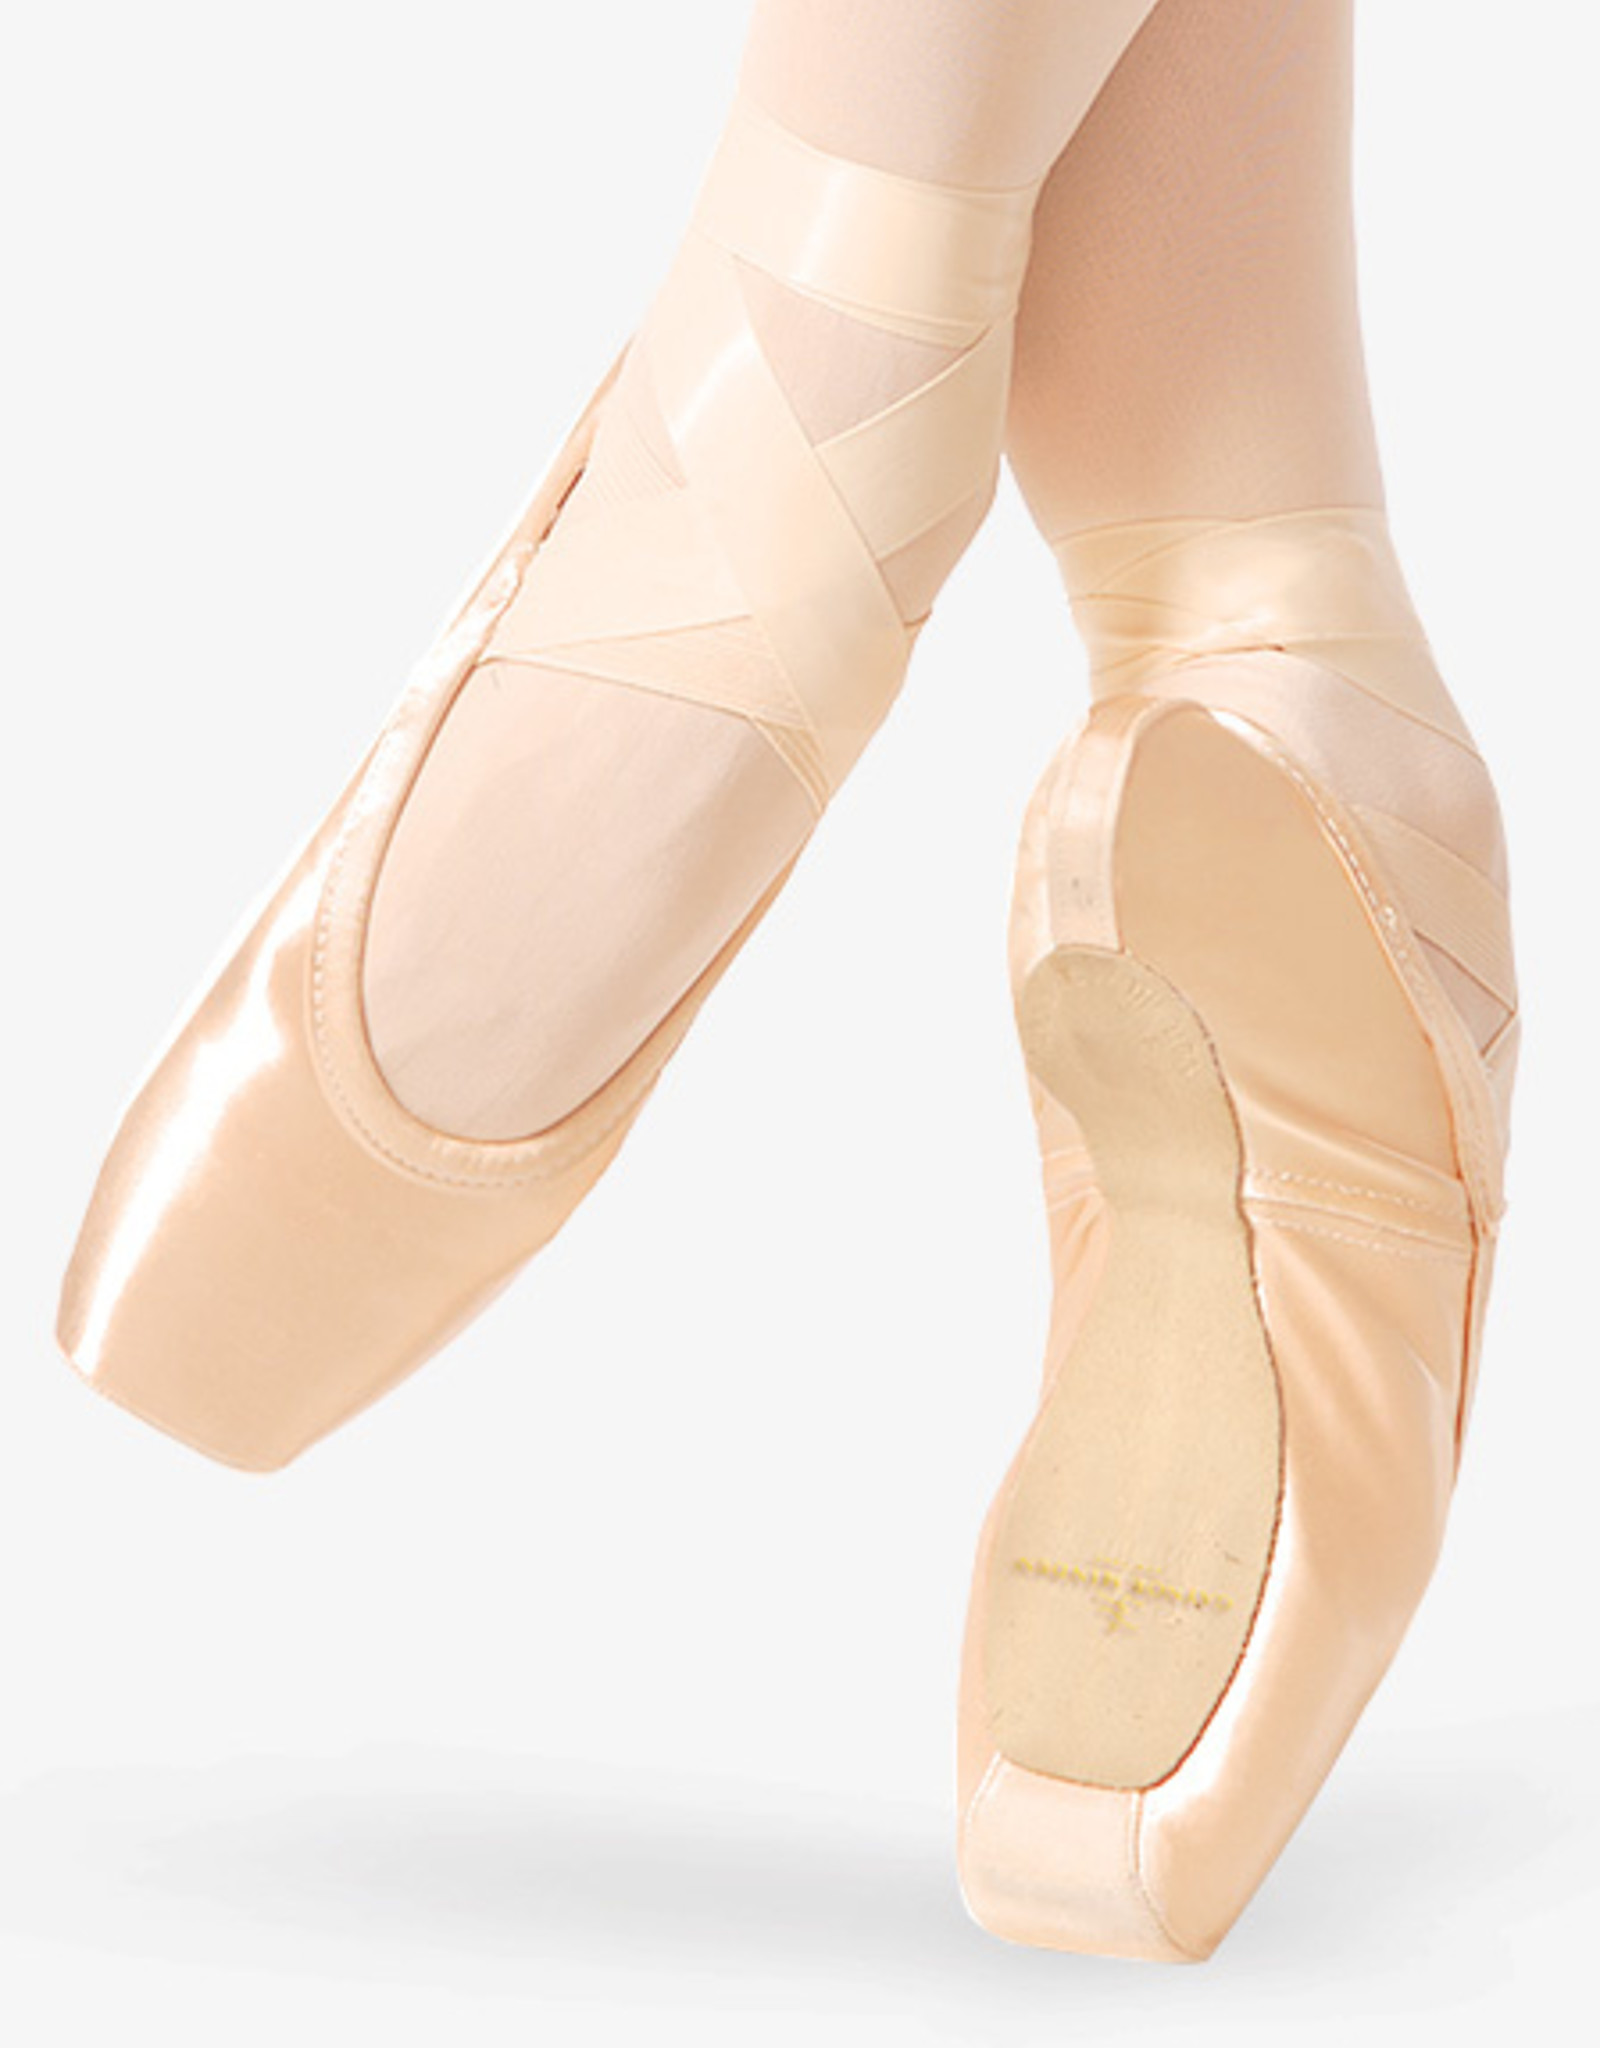 Gaynor Minden Europa Classic Pointe Shoes